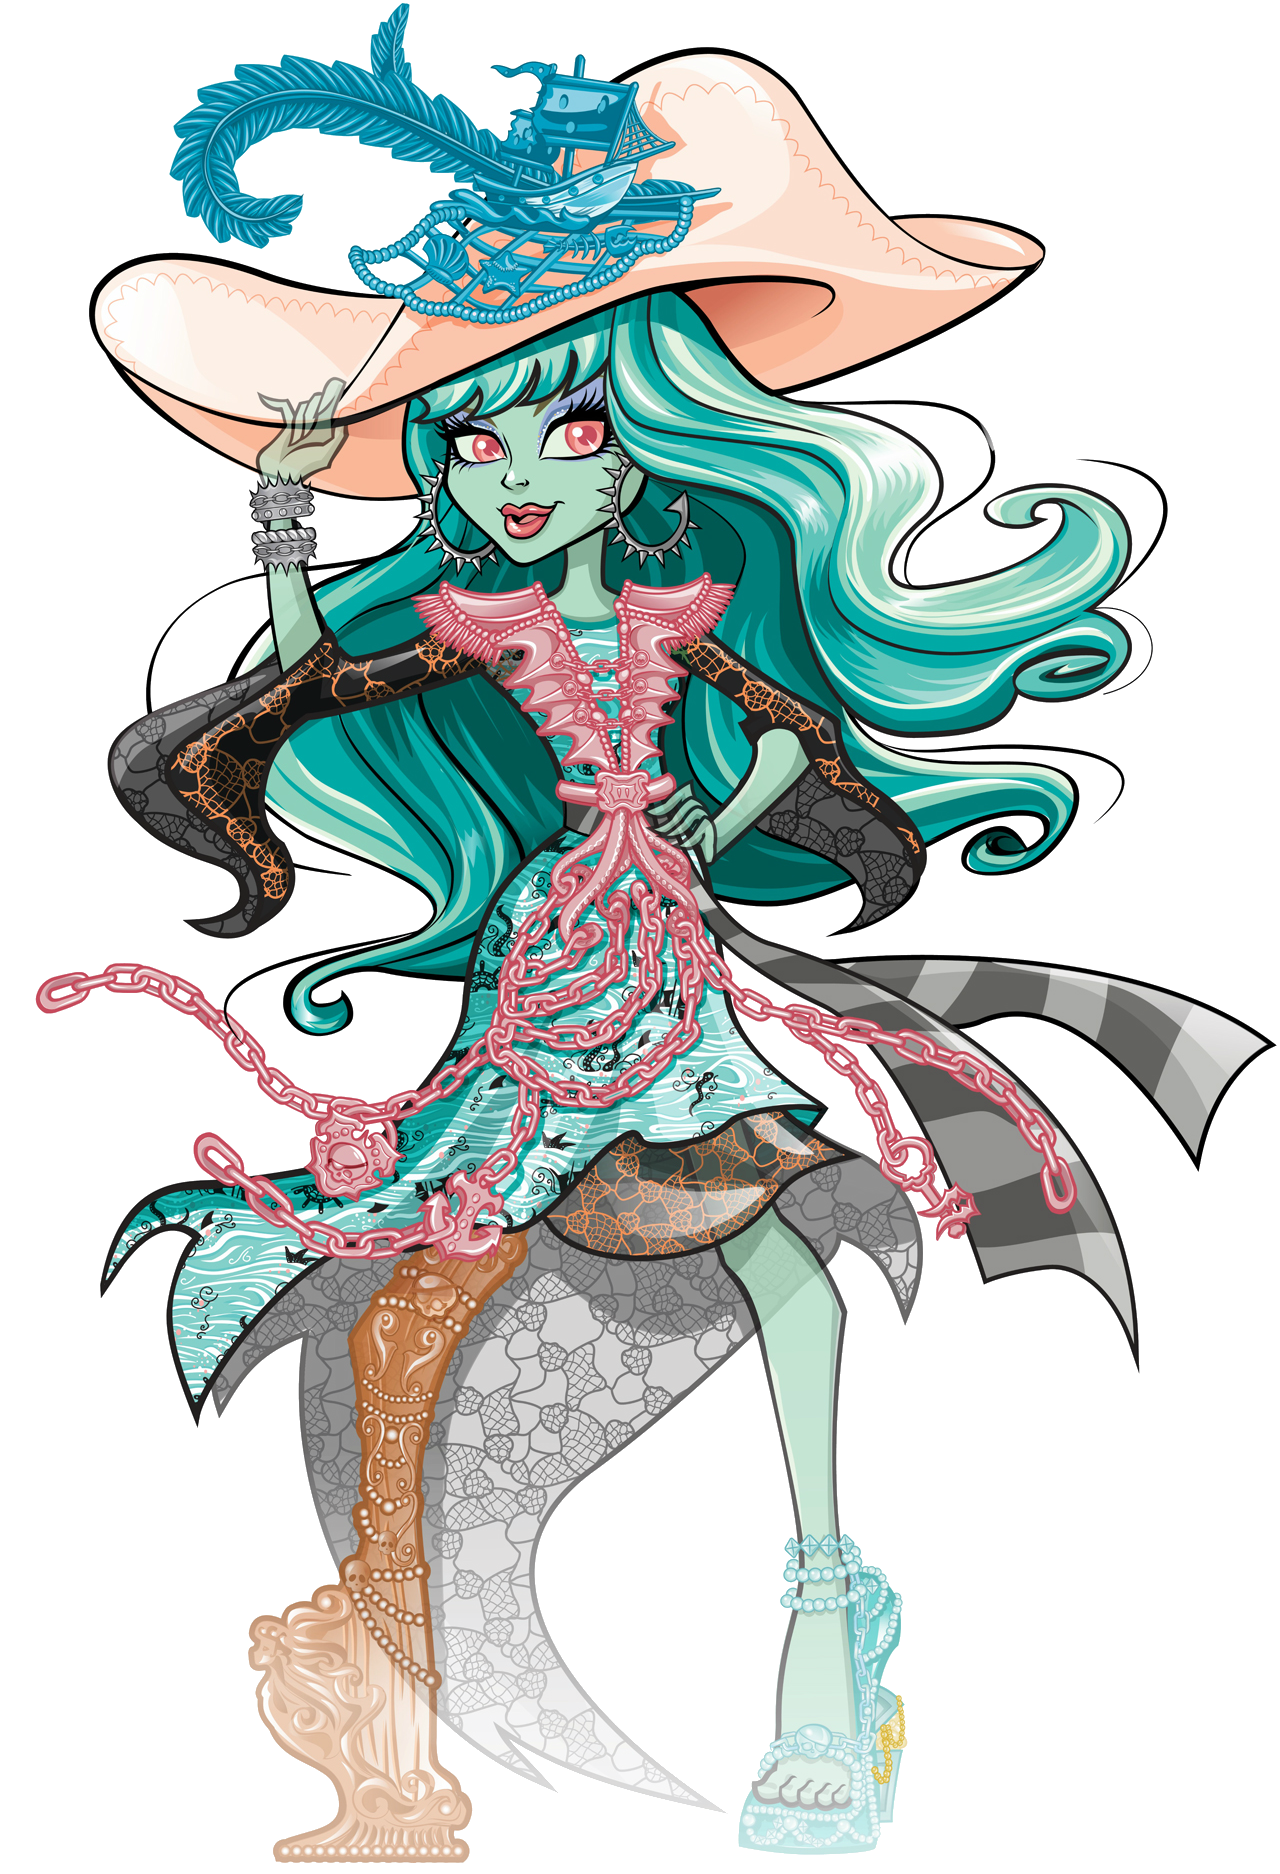 Vandala Doubloons | Monster High Wiki | Fandom powered by Wikia